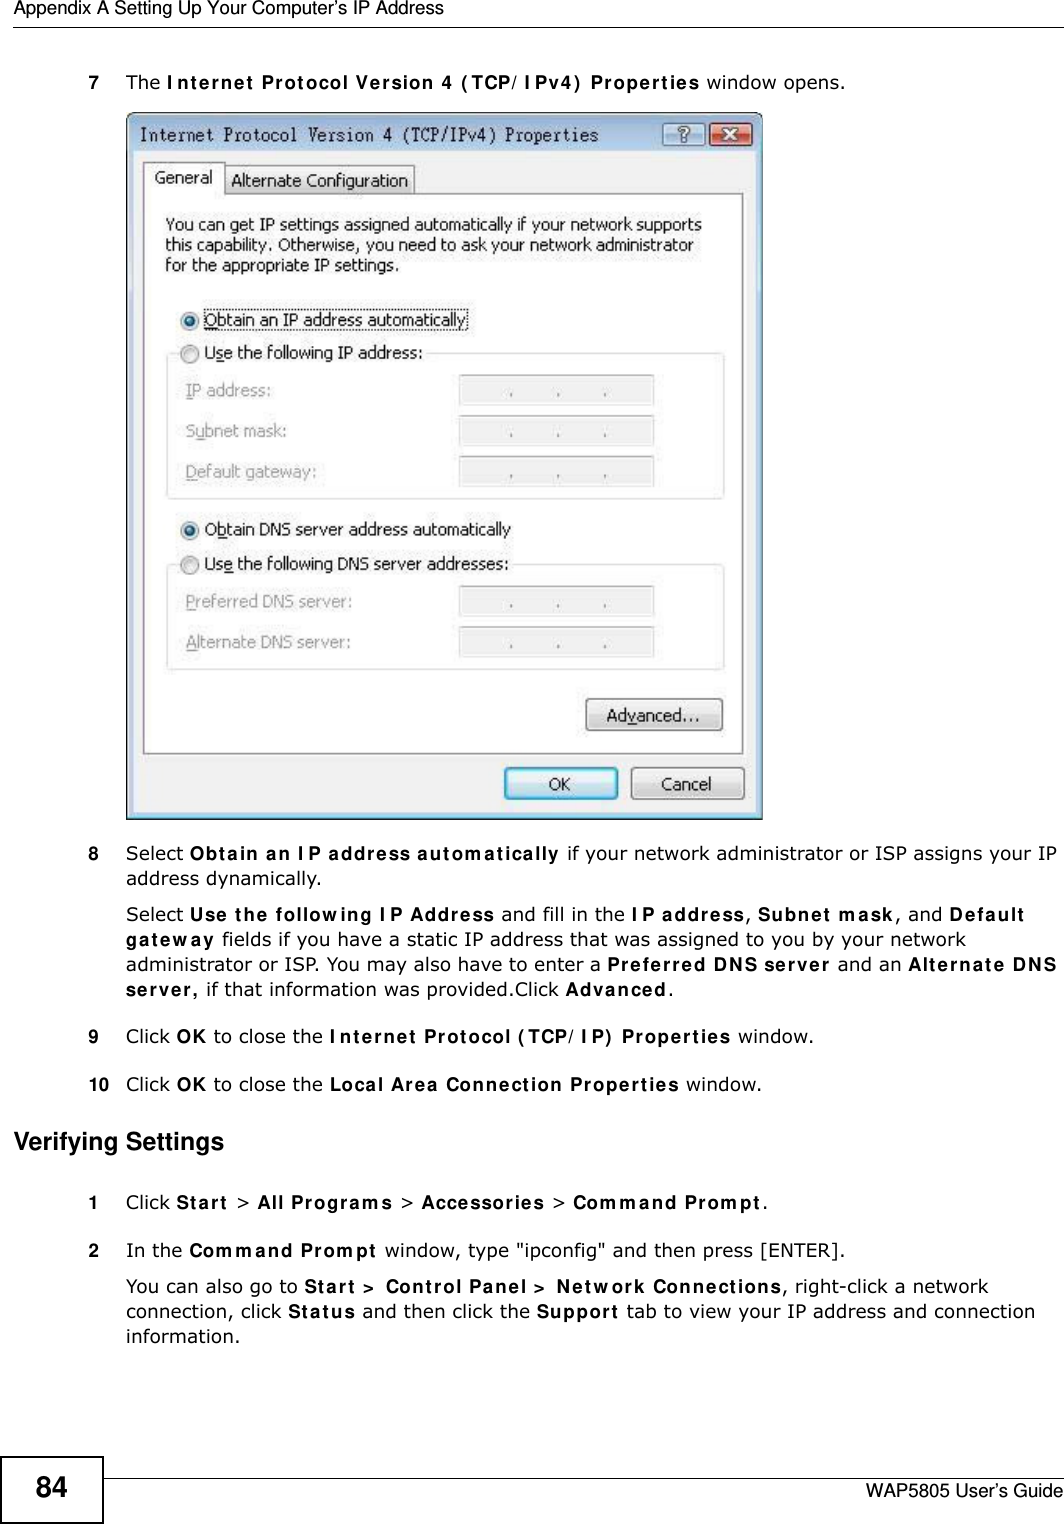 Appendix A Setting Up Your Computer’s IP AddressWAP5805 User’s Guide847The Internet Protocol Version 4 (TCP/IPv4) Properties window opens.8Select Obtain an IP address automatically if your network administrator or ISP assigns your IP address dynamically.Select Use the following IP Address and fill in the IP address, Subnet mask, and Default gateway fields if you have a static IP address that was assigned to you by your network administrator or ISP. You may also have to enter a Preferred DNS server and an Alternate DNS server, if that information was provided.Click Advanced.9Click OK to close the Internet Protocol (TCP/IP) Properties window.10 Click OK to close the Local Area Connection Properties window.Verifying Settings1Click Start &gt; All Programs &gt; Accessories &gt; Command Prompt.2In the Command Prompt window, type &quot;ipconfig&quot; and then press [ENTER]. You can also go to Start &gt; Control Panel &gt; Network Connections, right-click a network connection, click Status and then click the Support tab to view your IP address and connection information.